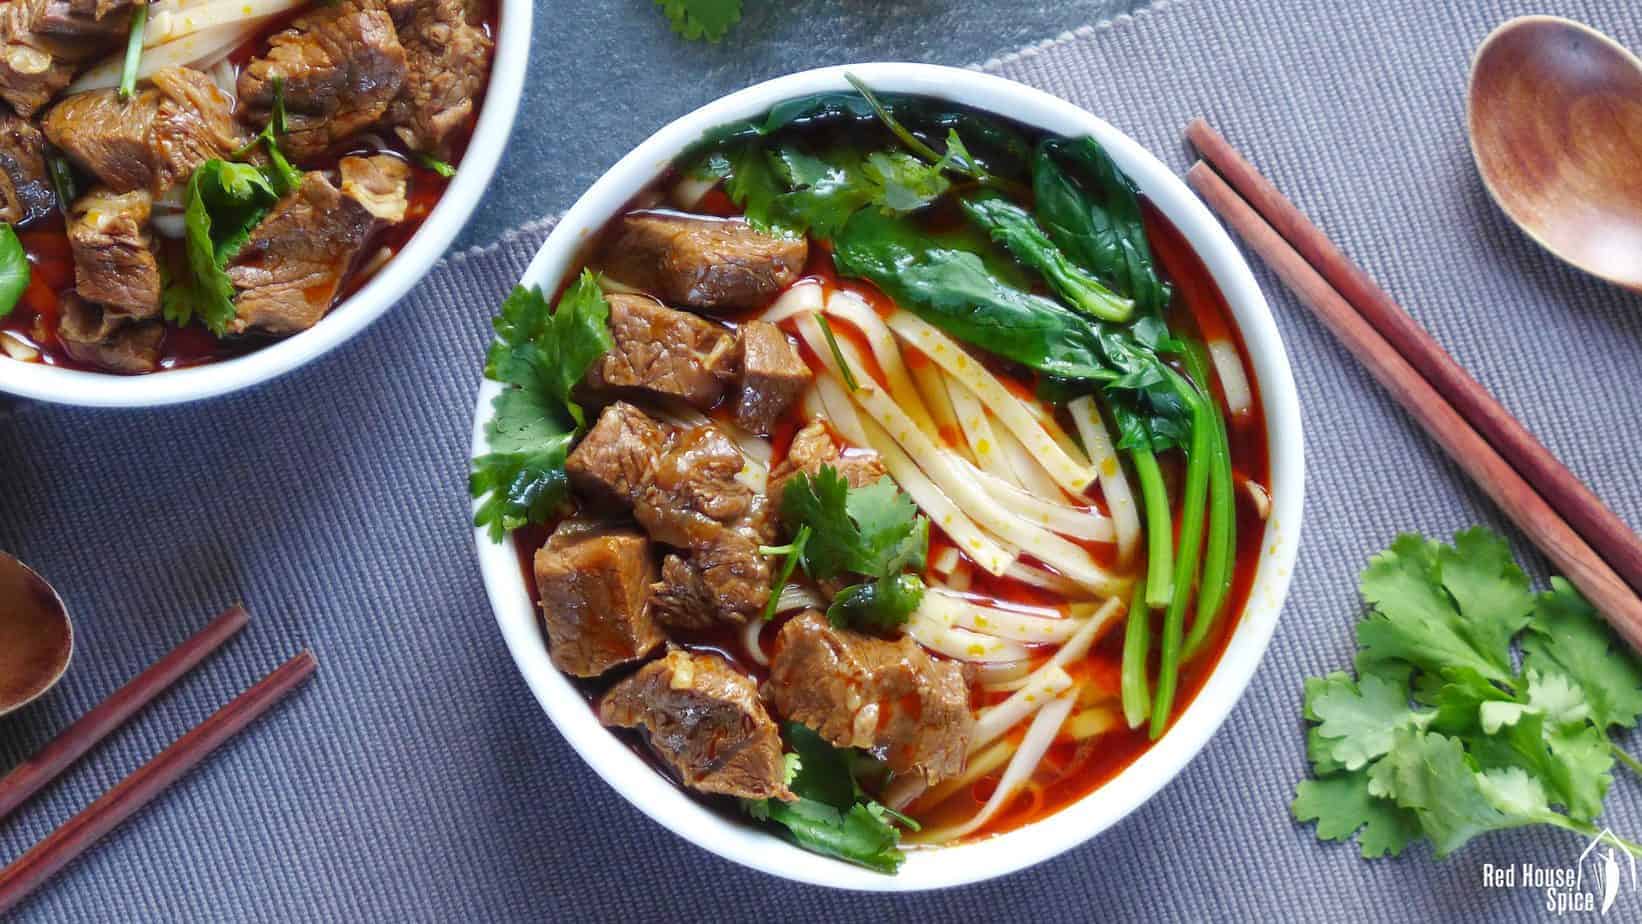 Spicy noodle soup topped with braised beef cubes